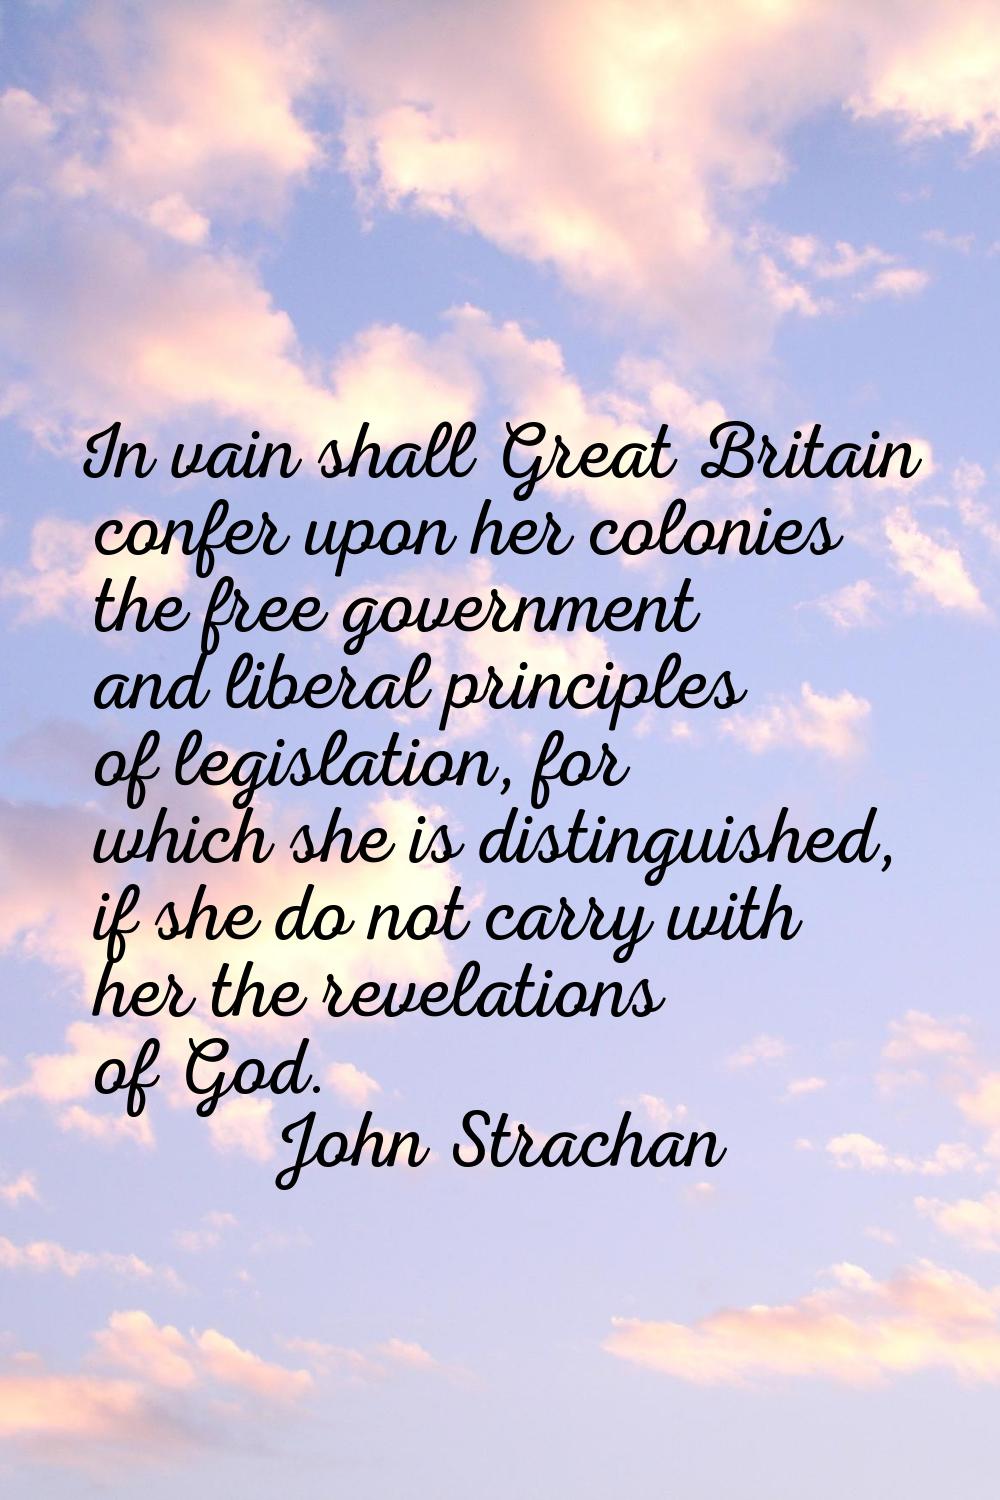 In vain shall Great Britain confer upon her colonies the free government and liberal principles of 